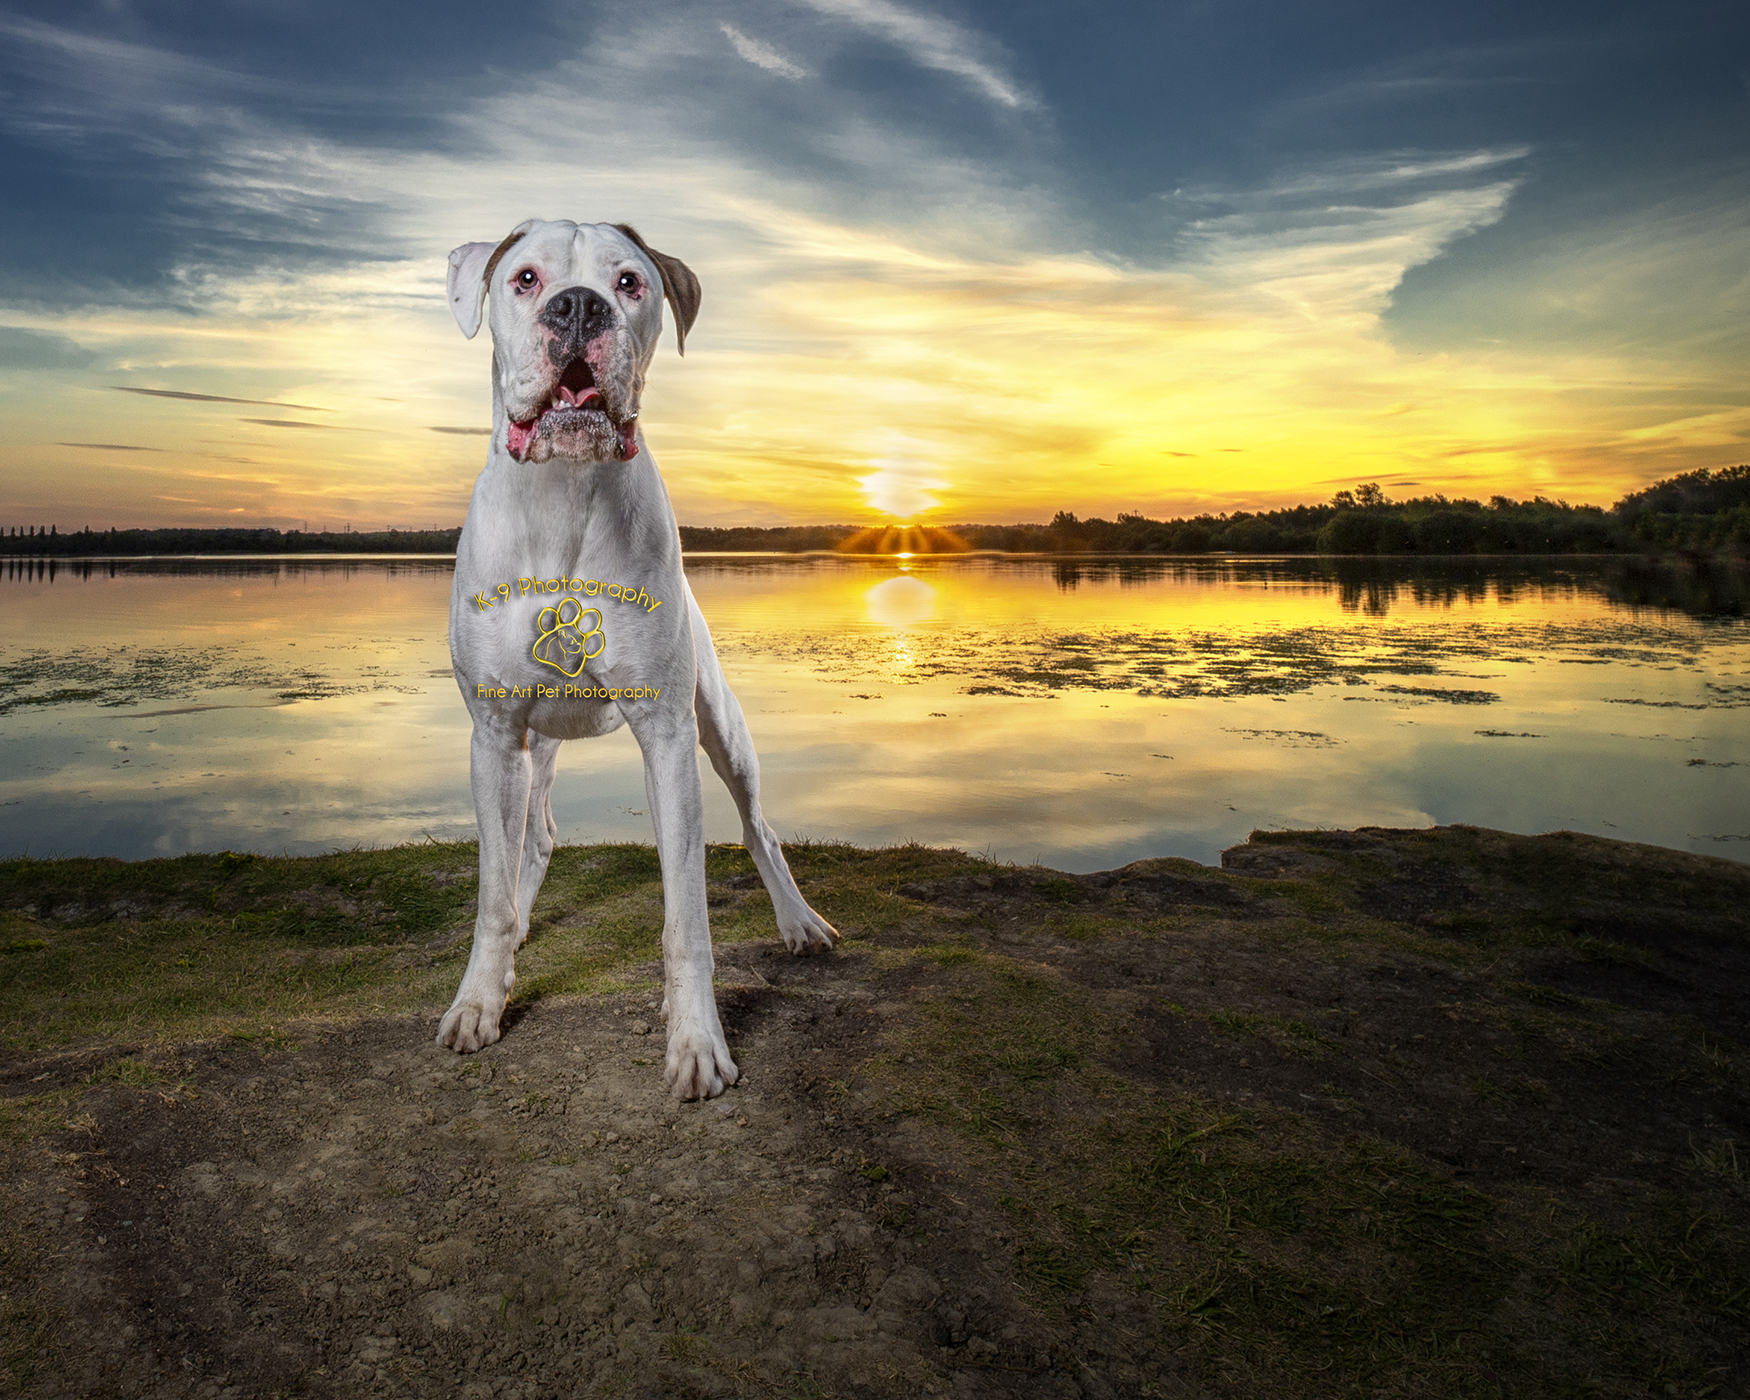 dog photography in London, Hertfordshire and Bedfordshire by K-9 photography - Frankie the boxer dog taken at sunset